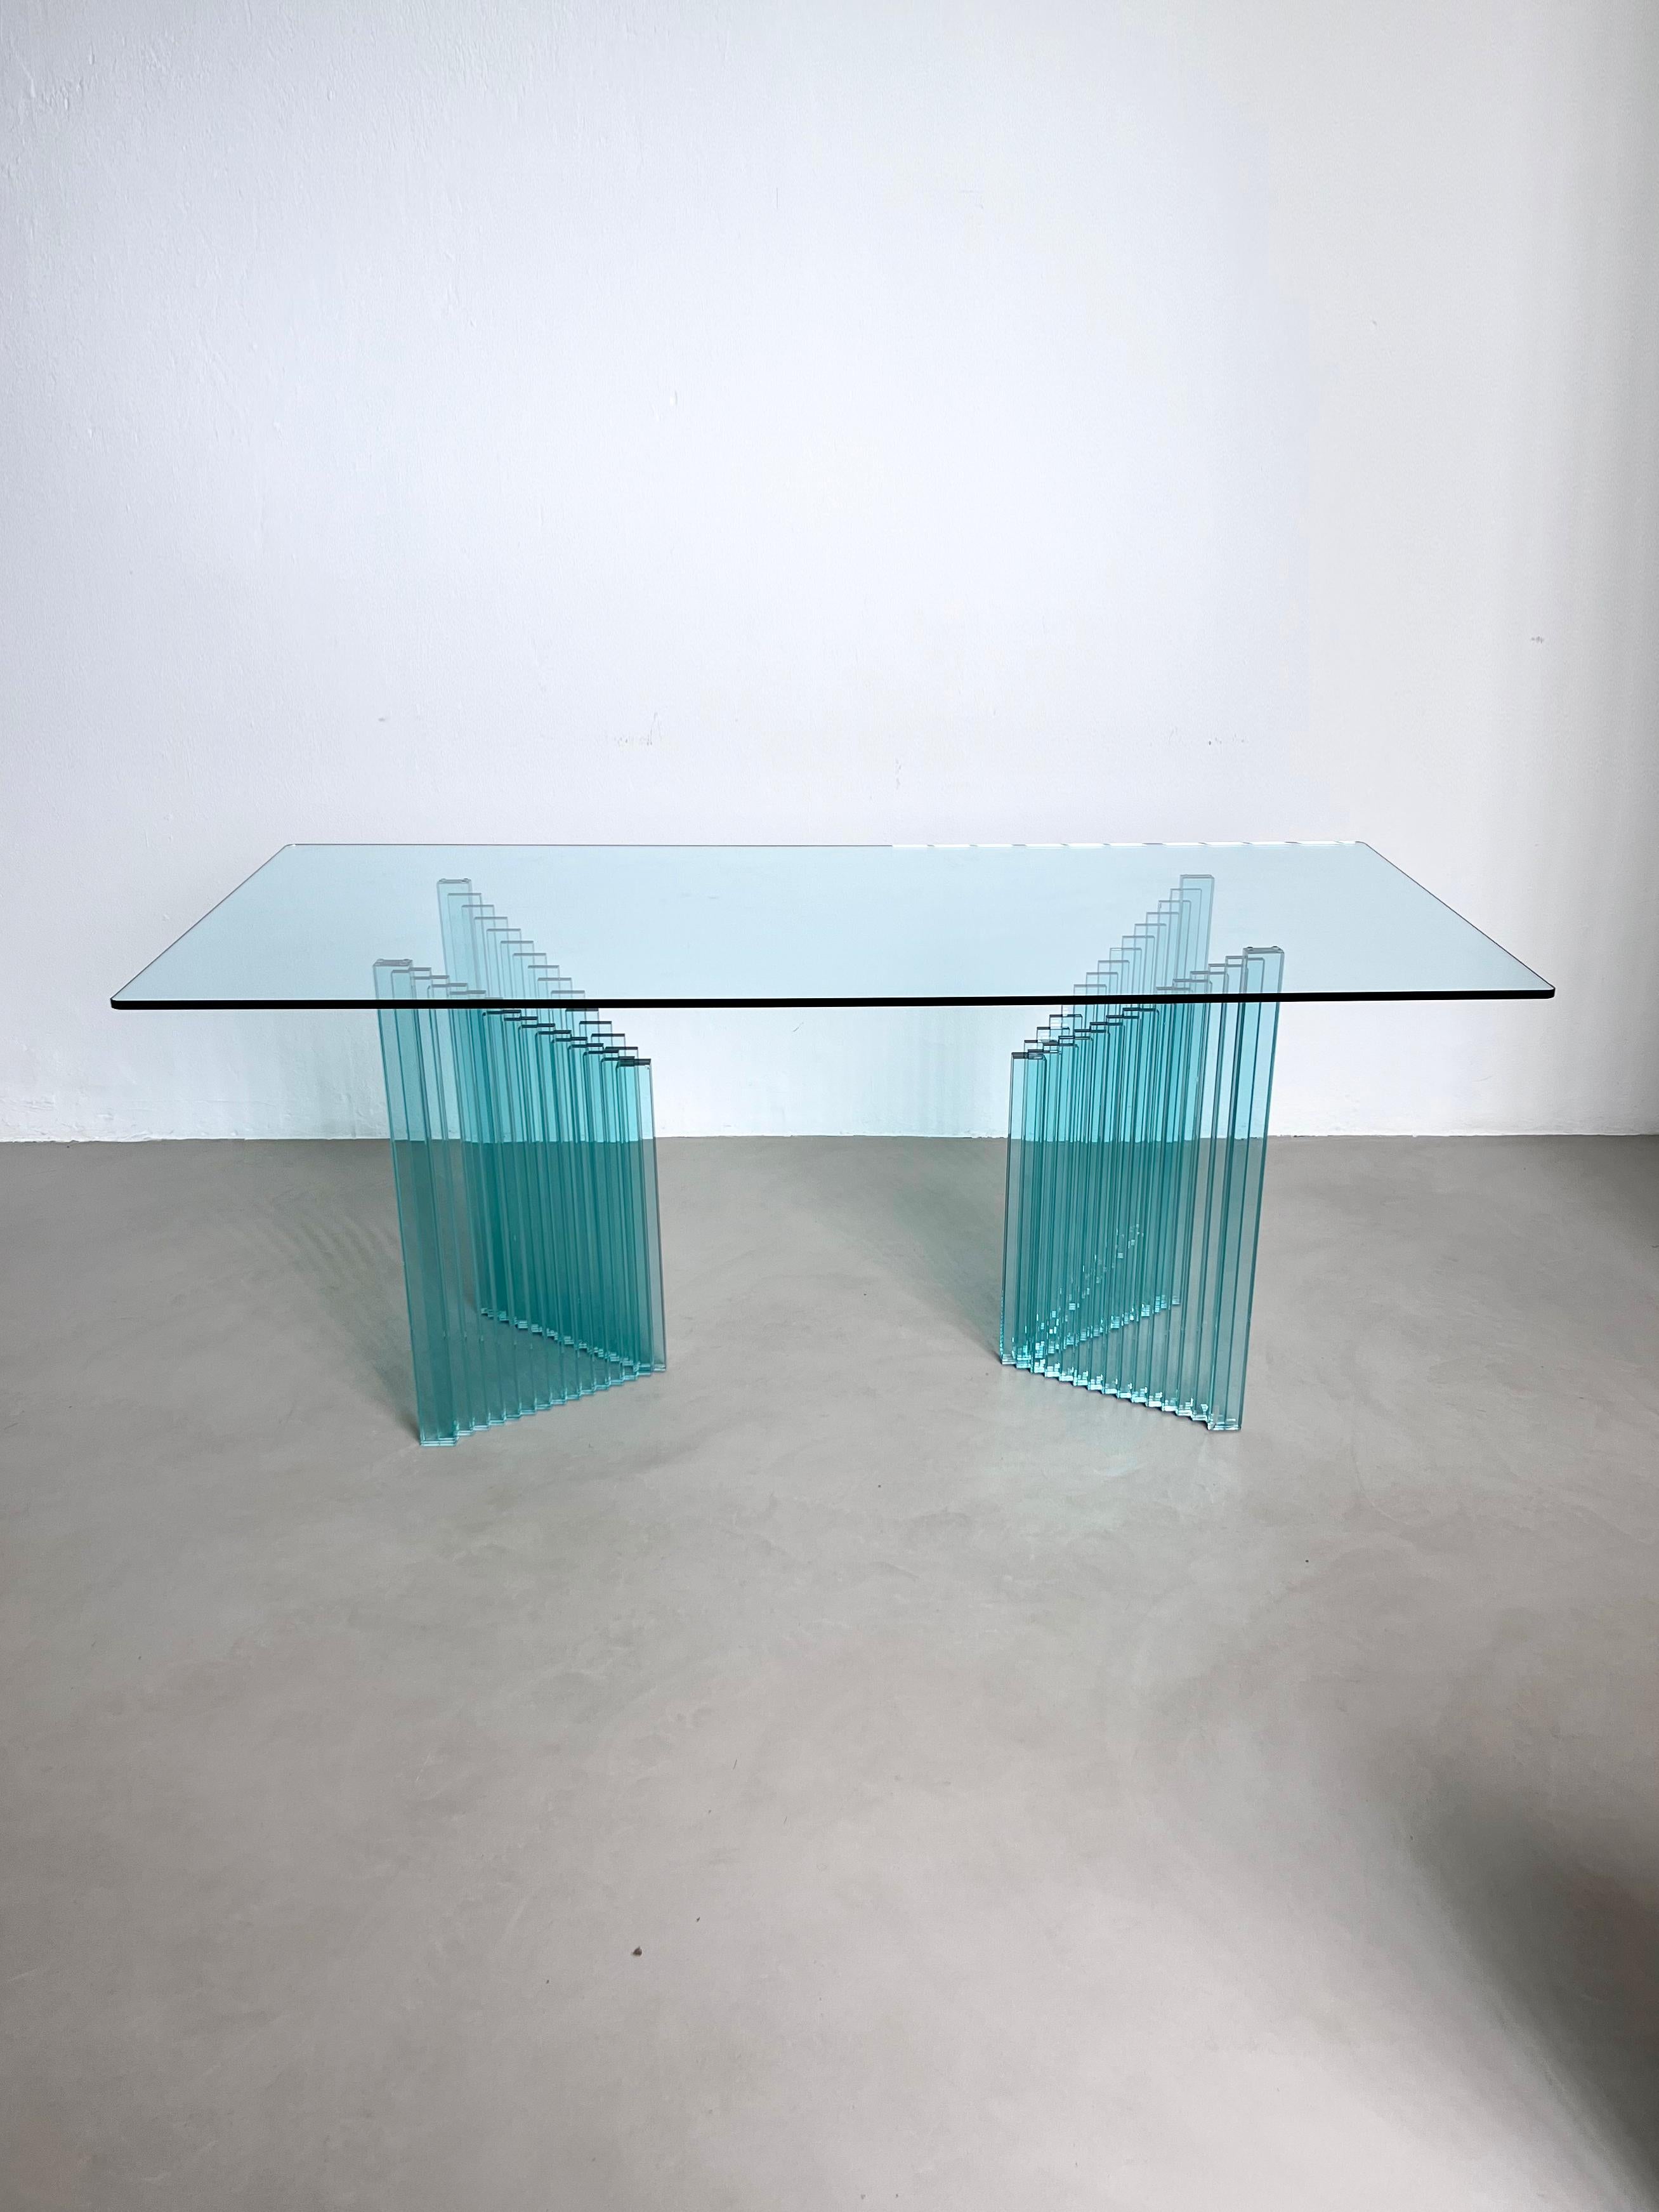 Contemporary design 1980s glass dining table by Luigi Massoni for Gallotti & Radice.

The collaboration between Gallotti & Radice and architect Luigi Massoni began in 1969, when he reached out to the furniture brand asking for a custom table to use